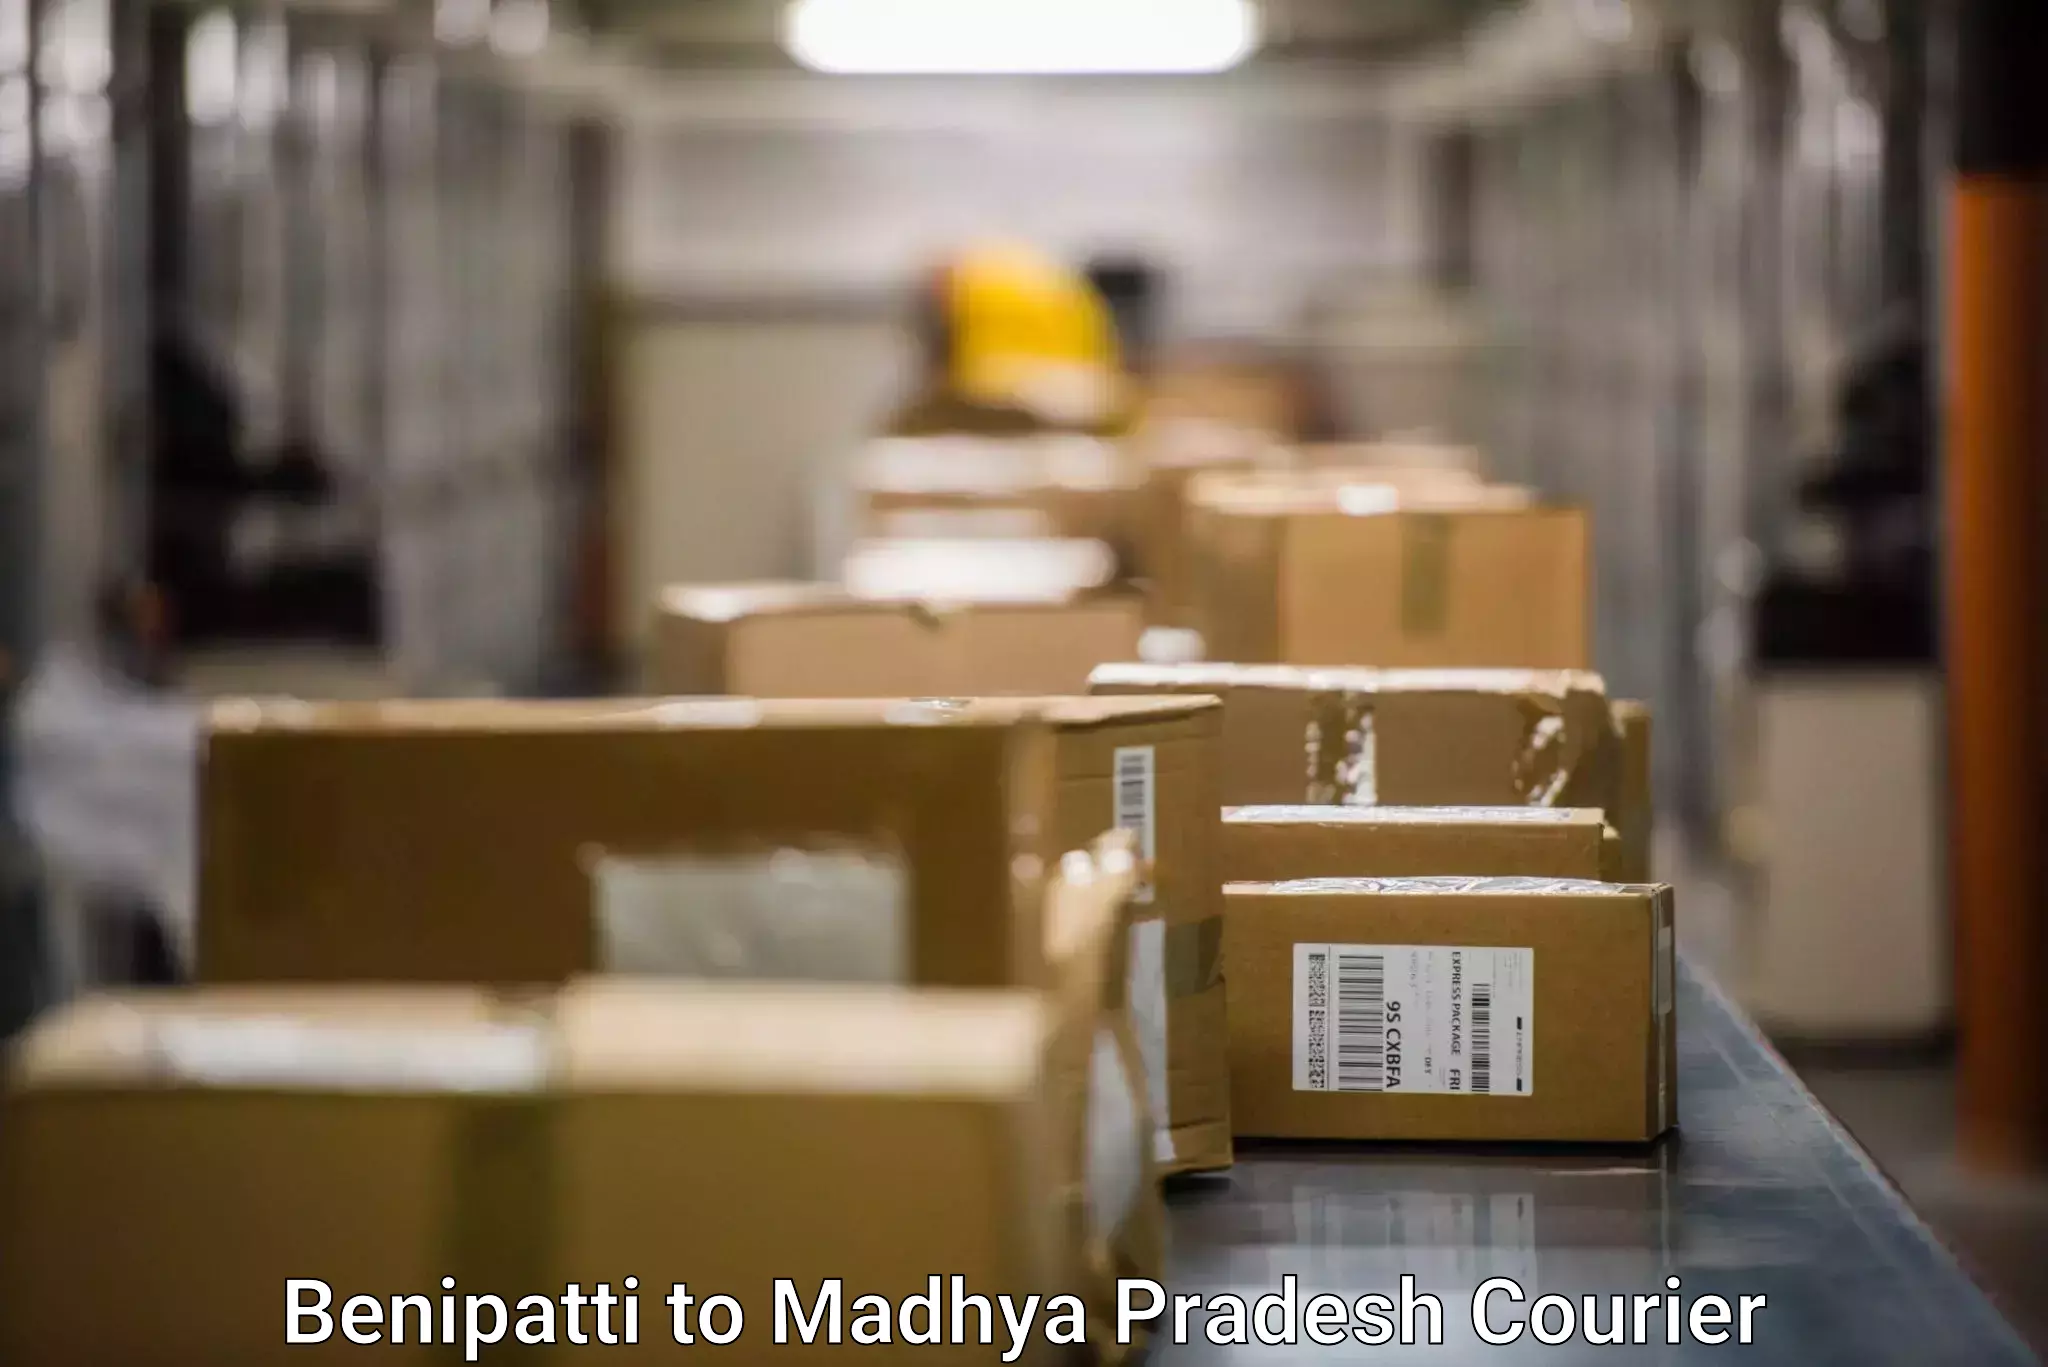 Tailored shipping plans Benipatti to IIIT Bhopal